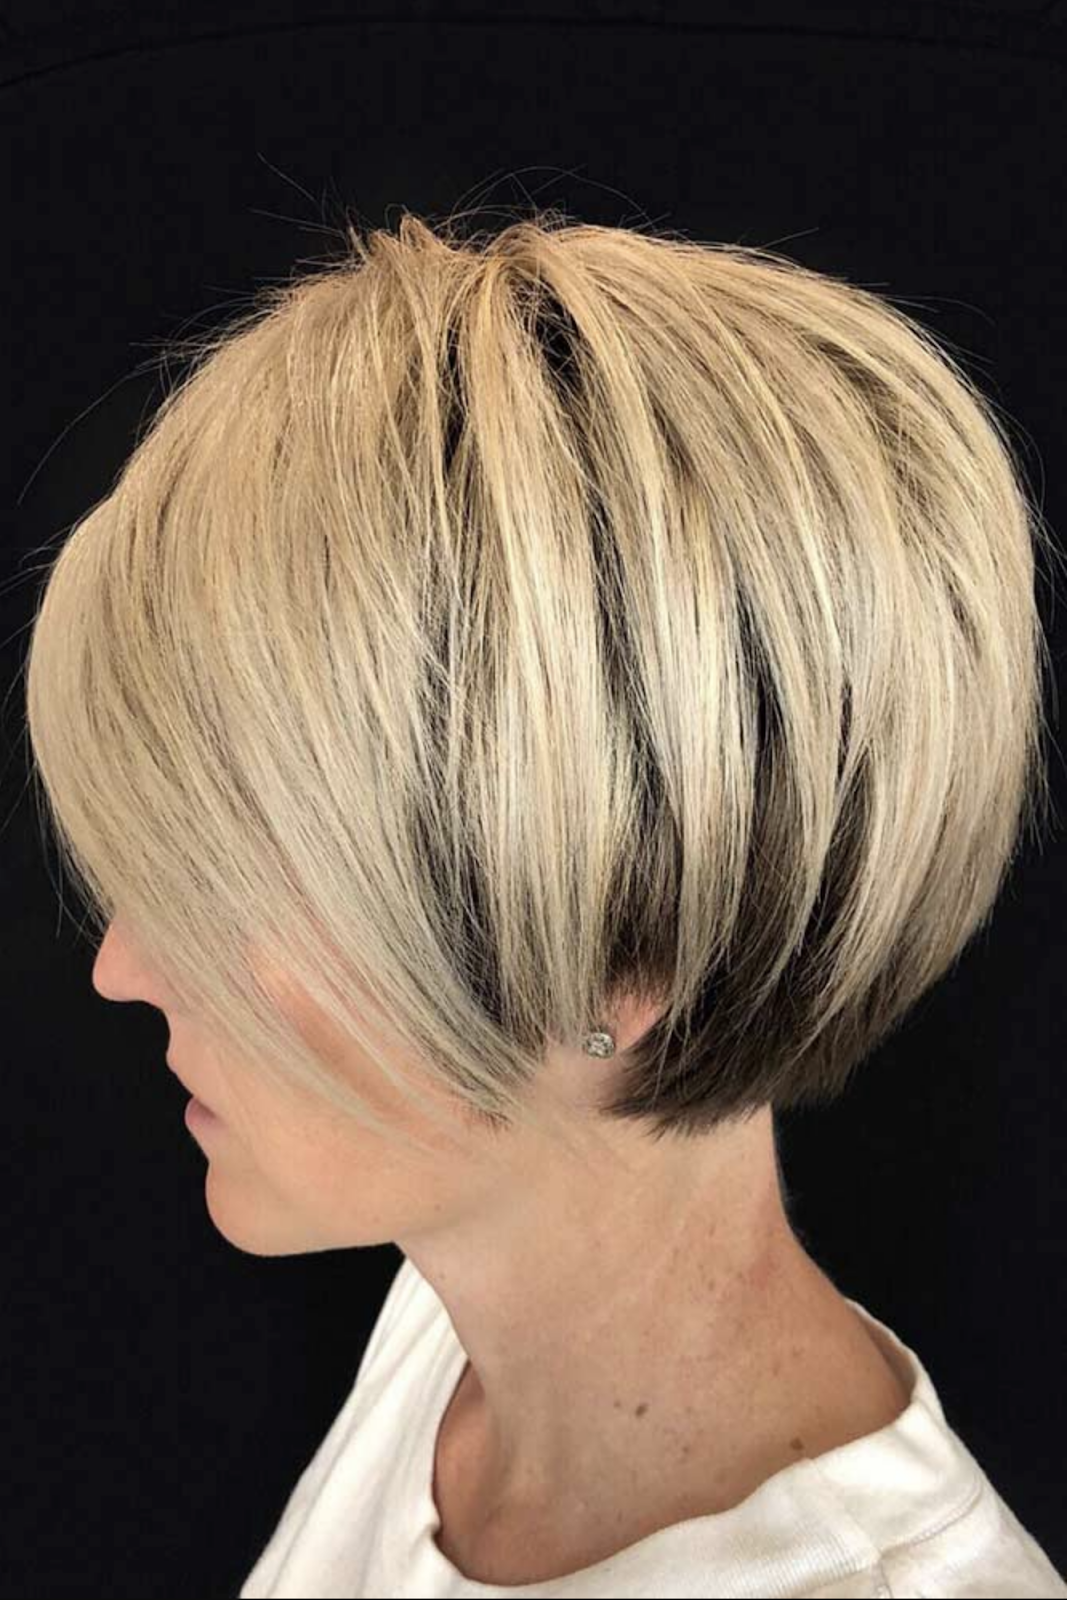 2019 - 2020 Short Hairstyles for Women Over 50 That Are ...